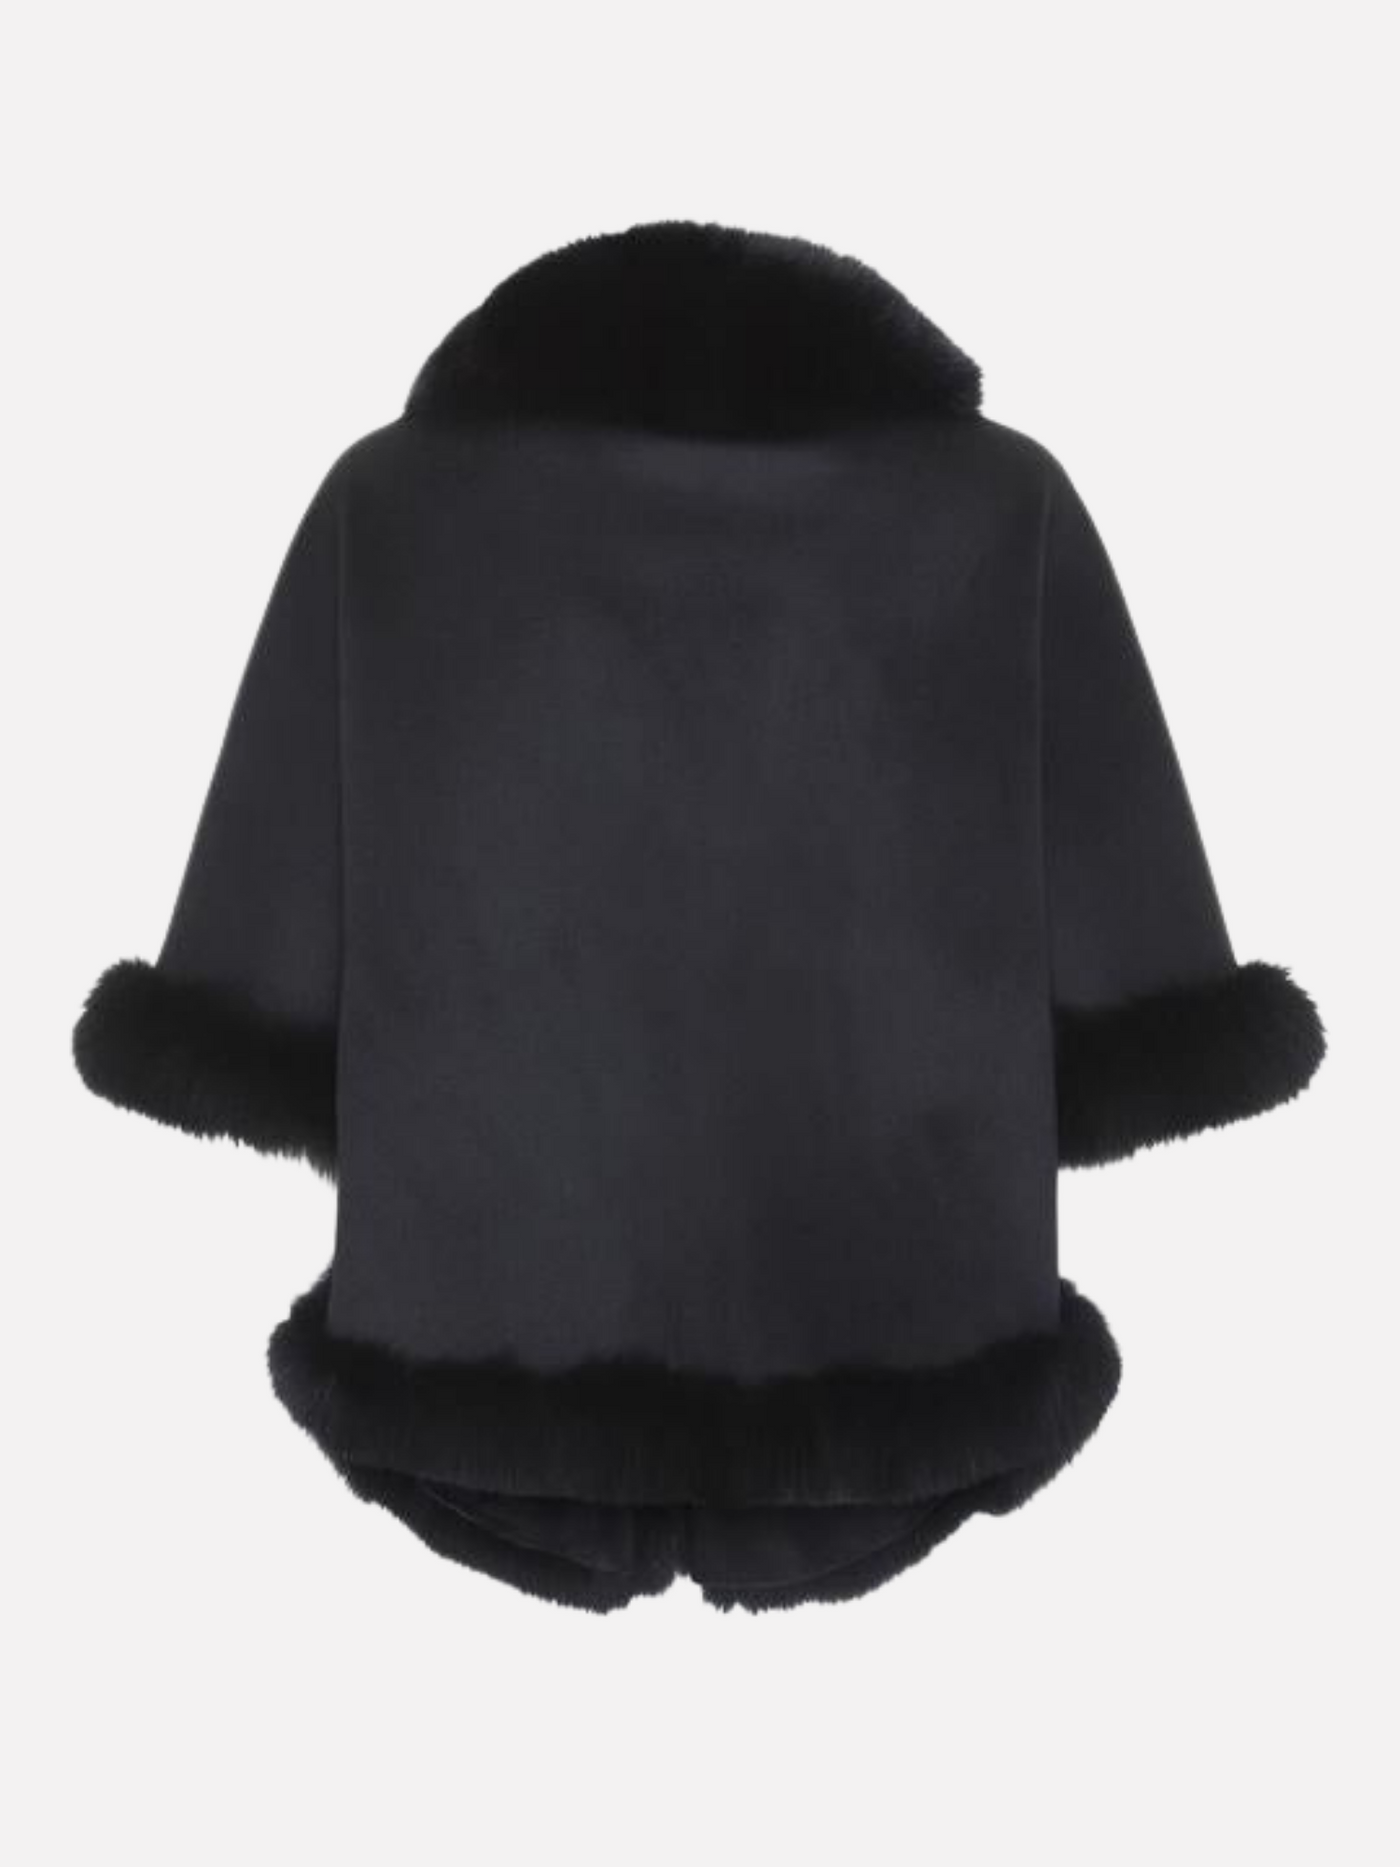 Chadron Cape, 65 cm. - Thinner Double Face Wool - Black / Sjal